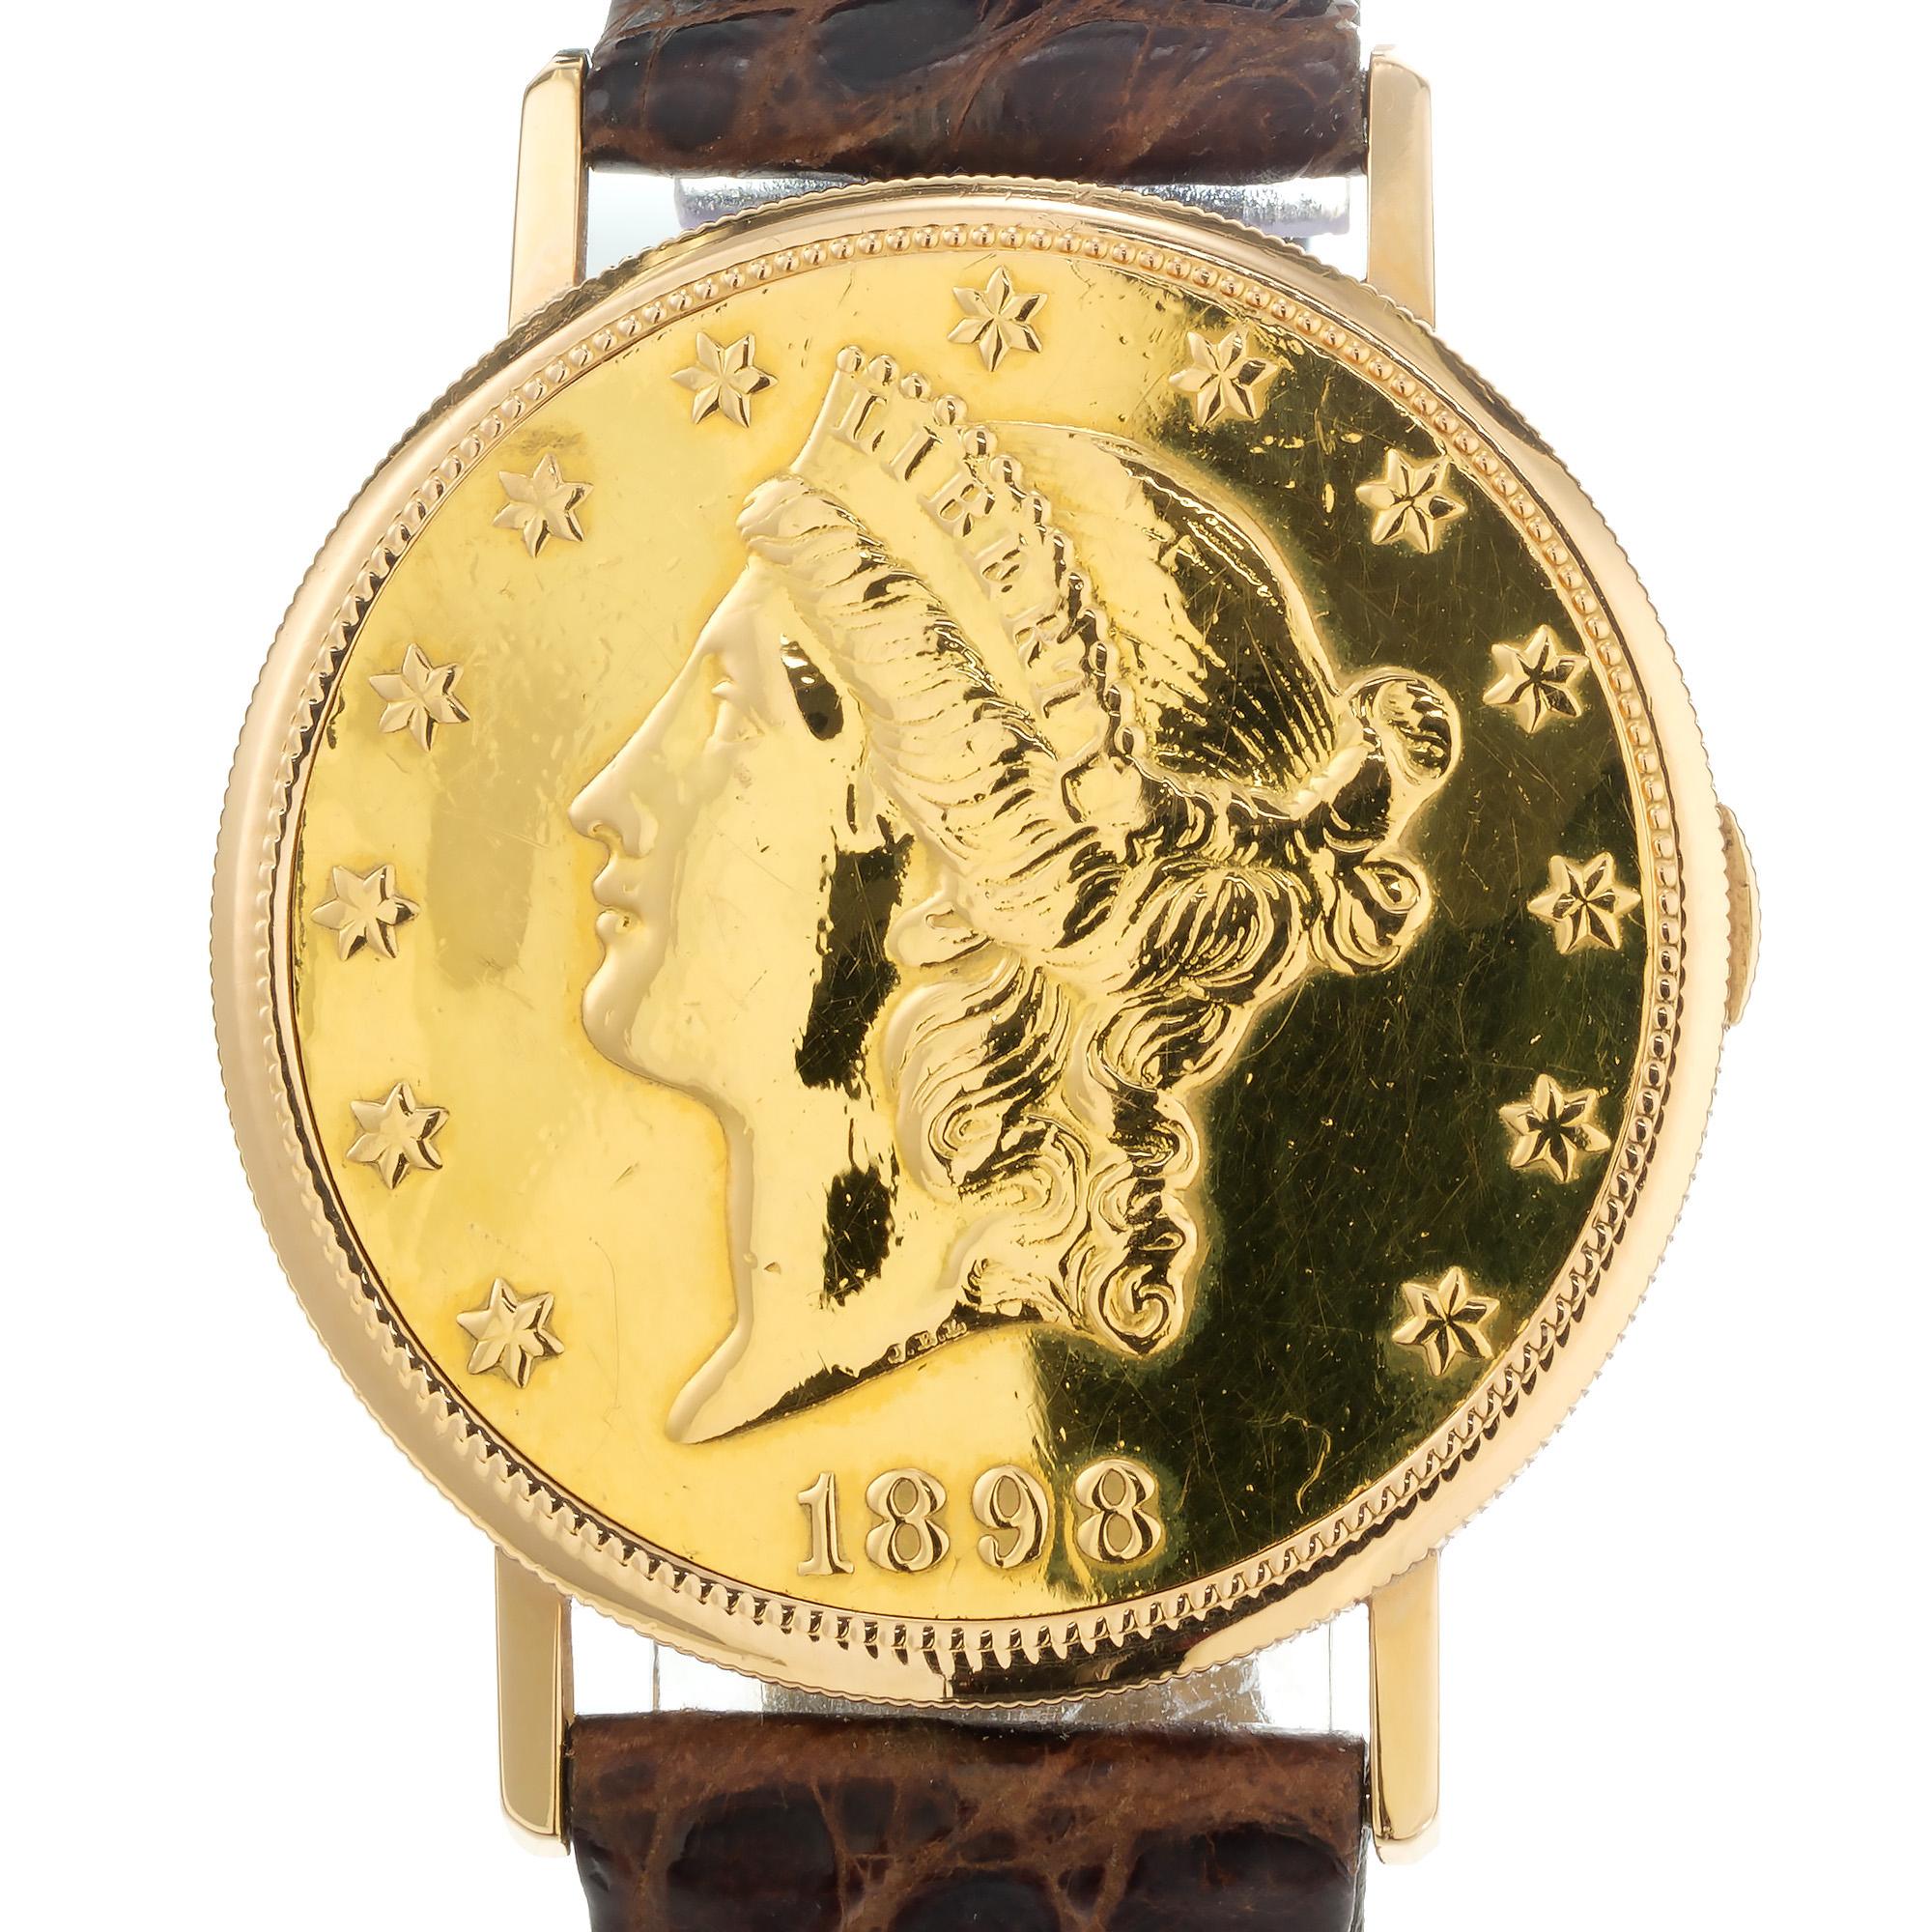 US dollar gold watch. Unique Eska 17 jewel manual wind wristwatch. The case is a US $20 dollar 1898 gold coin that opens via a side button which opens the front and reveals the Eska watch. The dial has the ability of pop forward. Circa 1960's. Shows